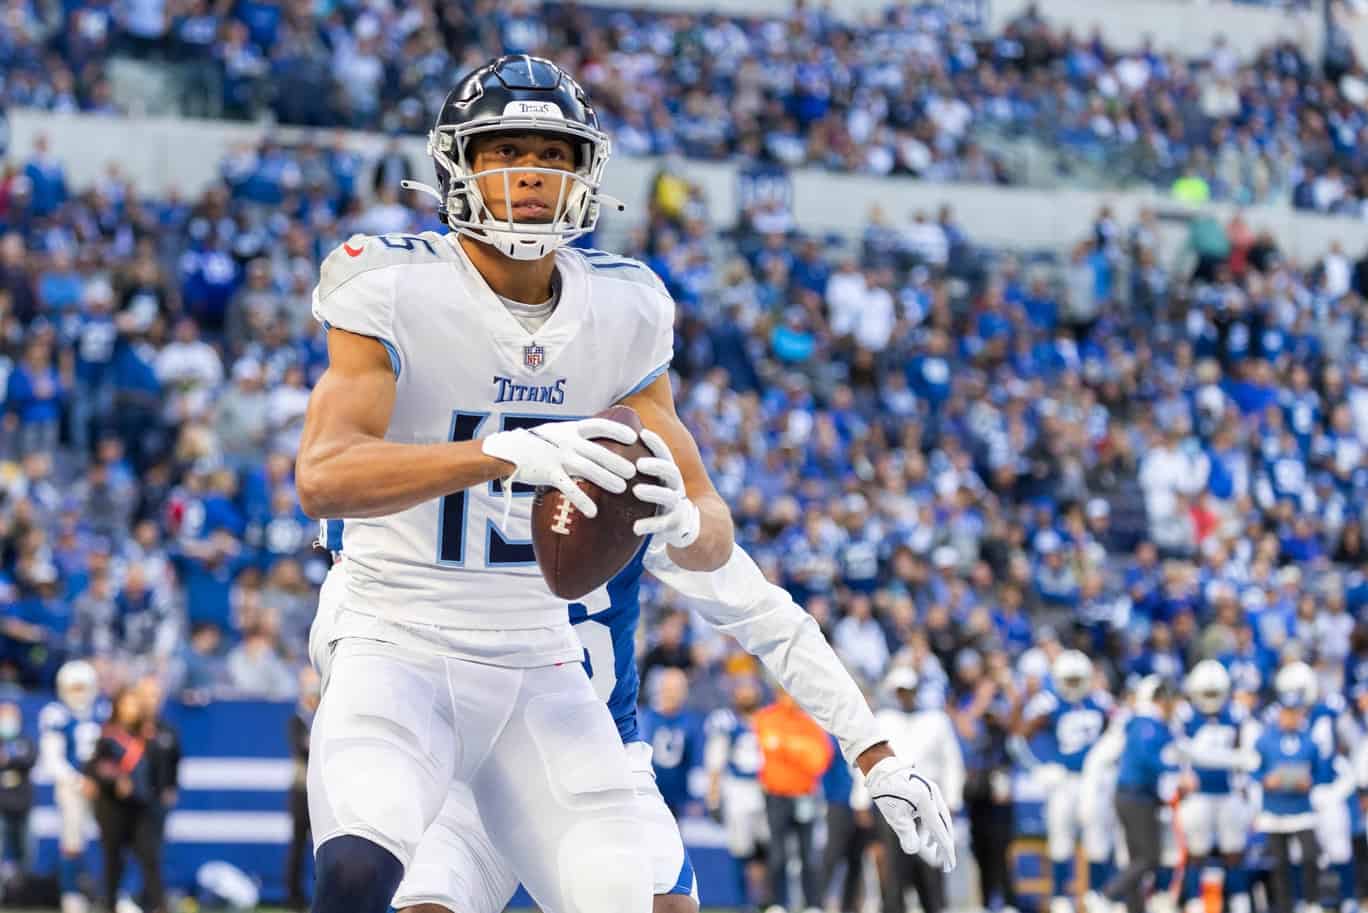 Nick Westbrook-Ikhine Waiver Wire Week 12: Is the Titans WR a must-add?